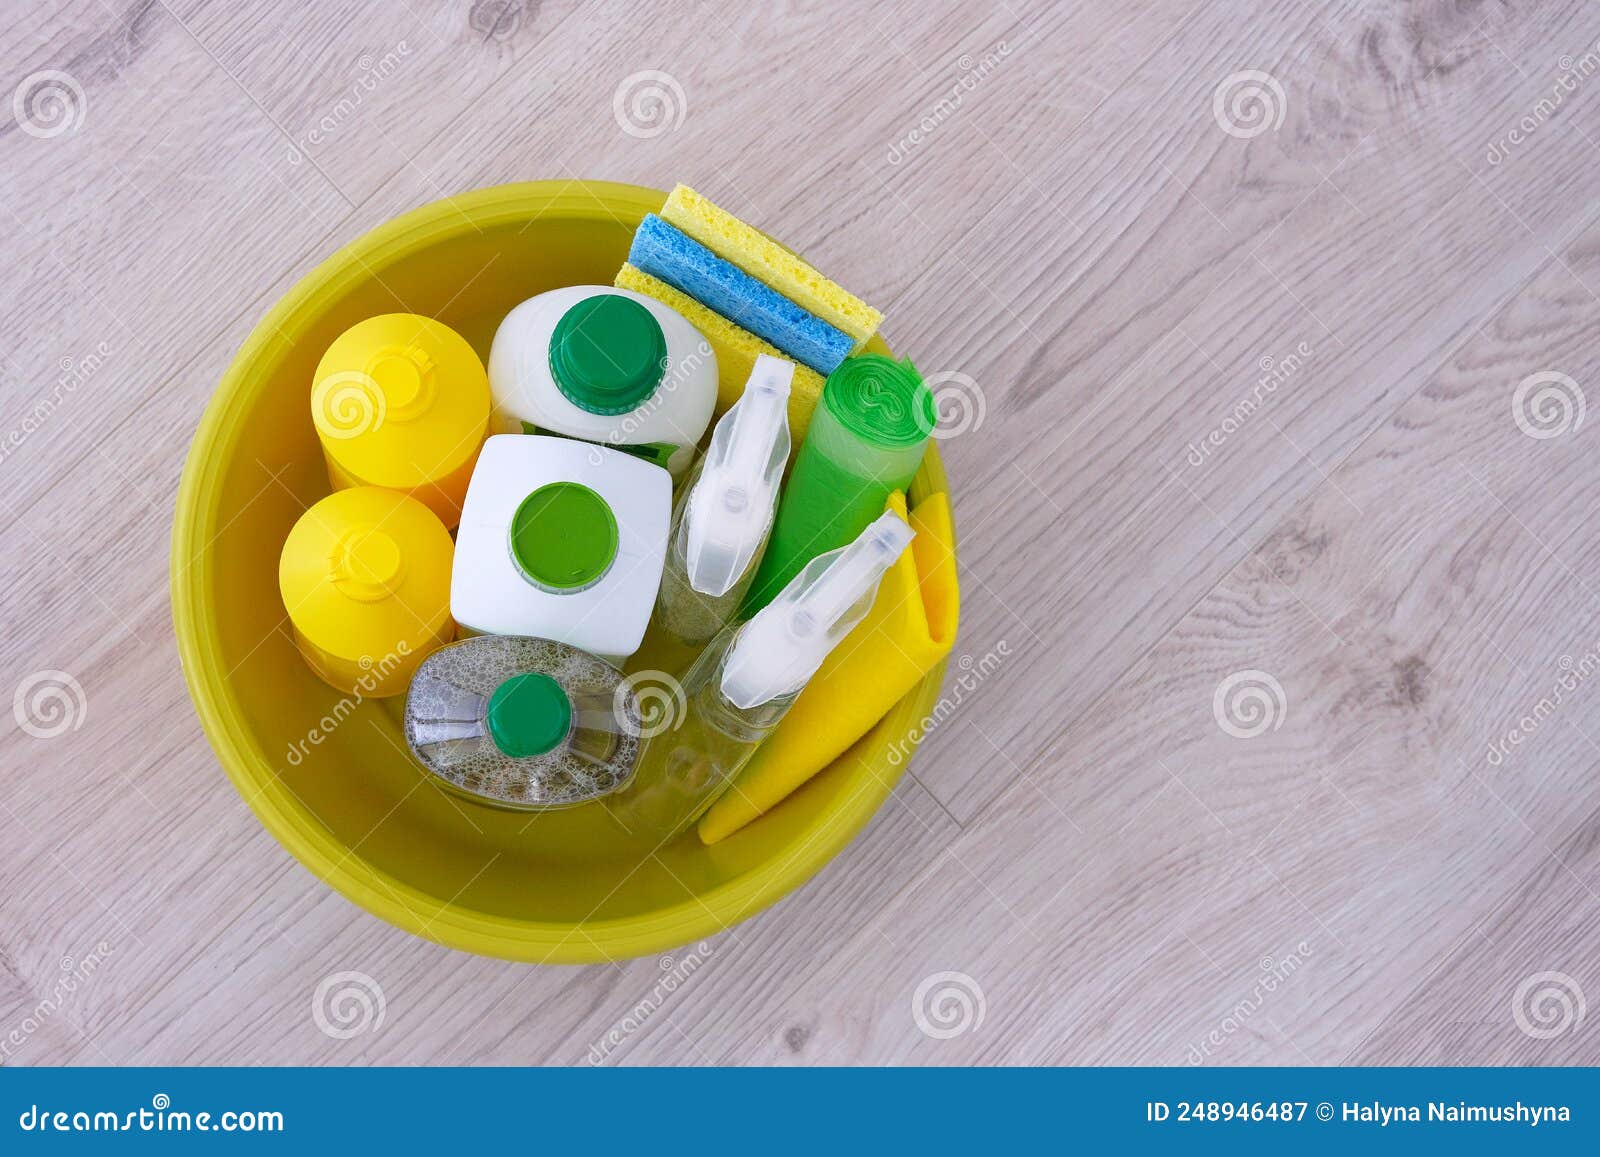 https://thumbs.dreamstime.com/z/flat-lay-cleaning-products-copy-space-cleaning-supplies-house-detergents-cloths-sponges-plastic-containers-green-bucke-248946487.jpg